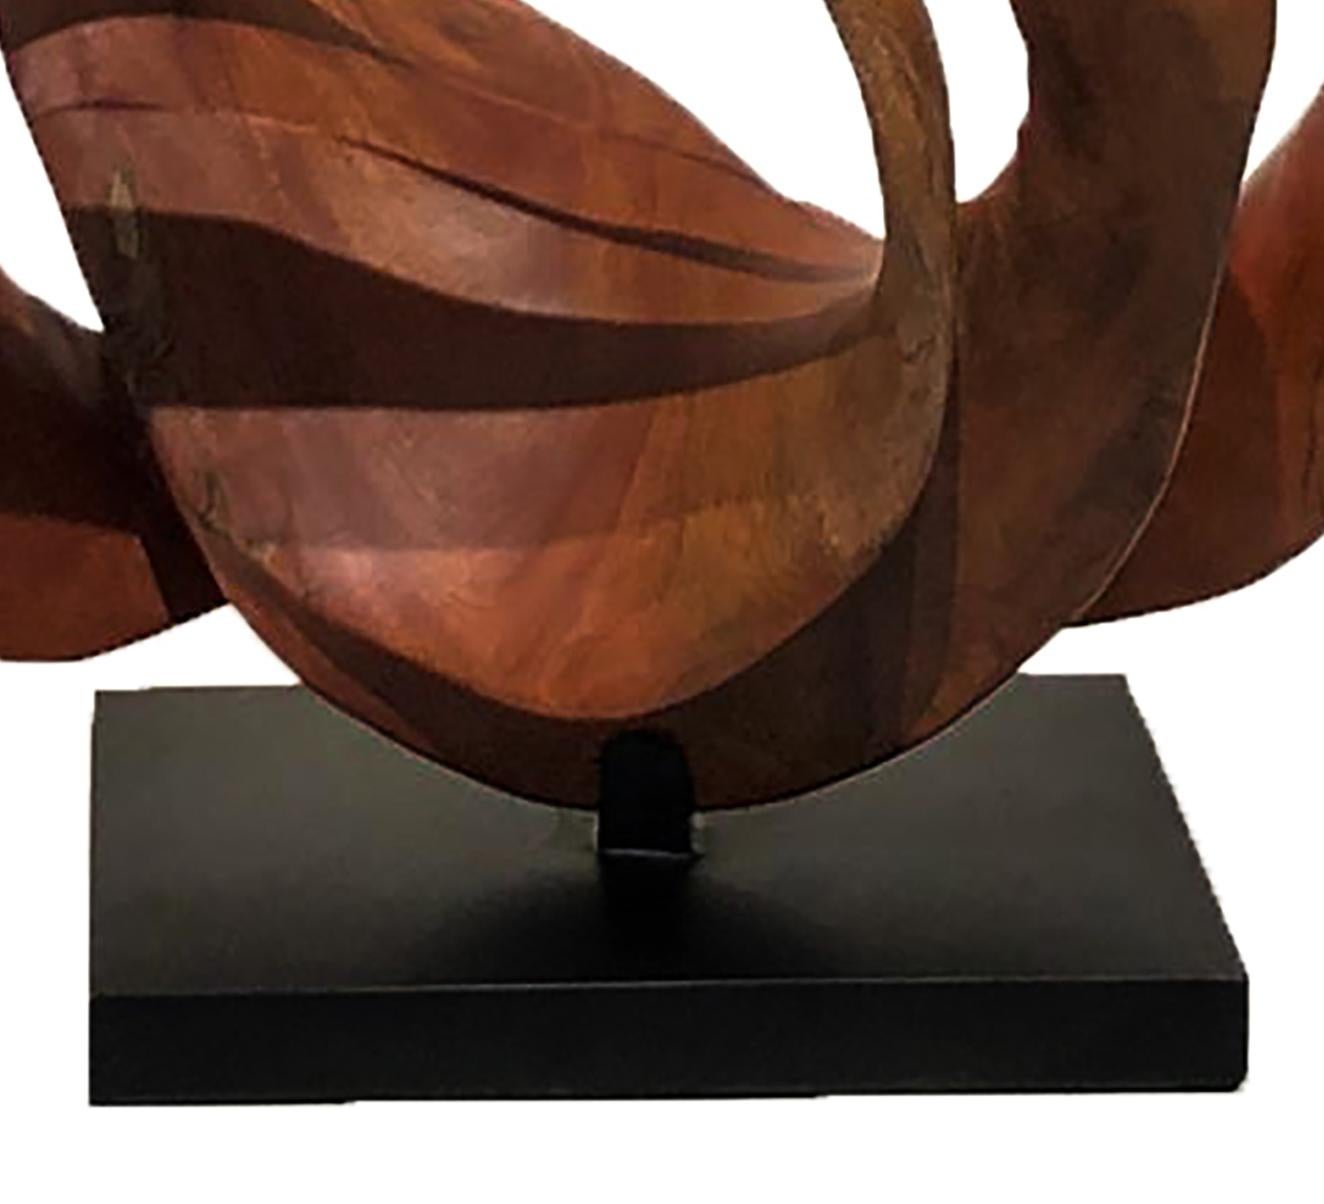 Mahogany roots

The Ingravidesa Sculpture Alliance is formed by an international group of sculptors and designers who collaborate to create abstract sculpture inspired by nature. They often work together for months on monumental projects. The pieces